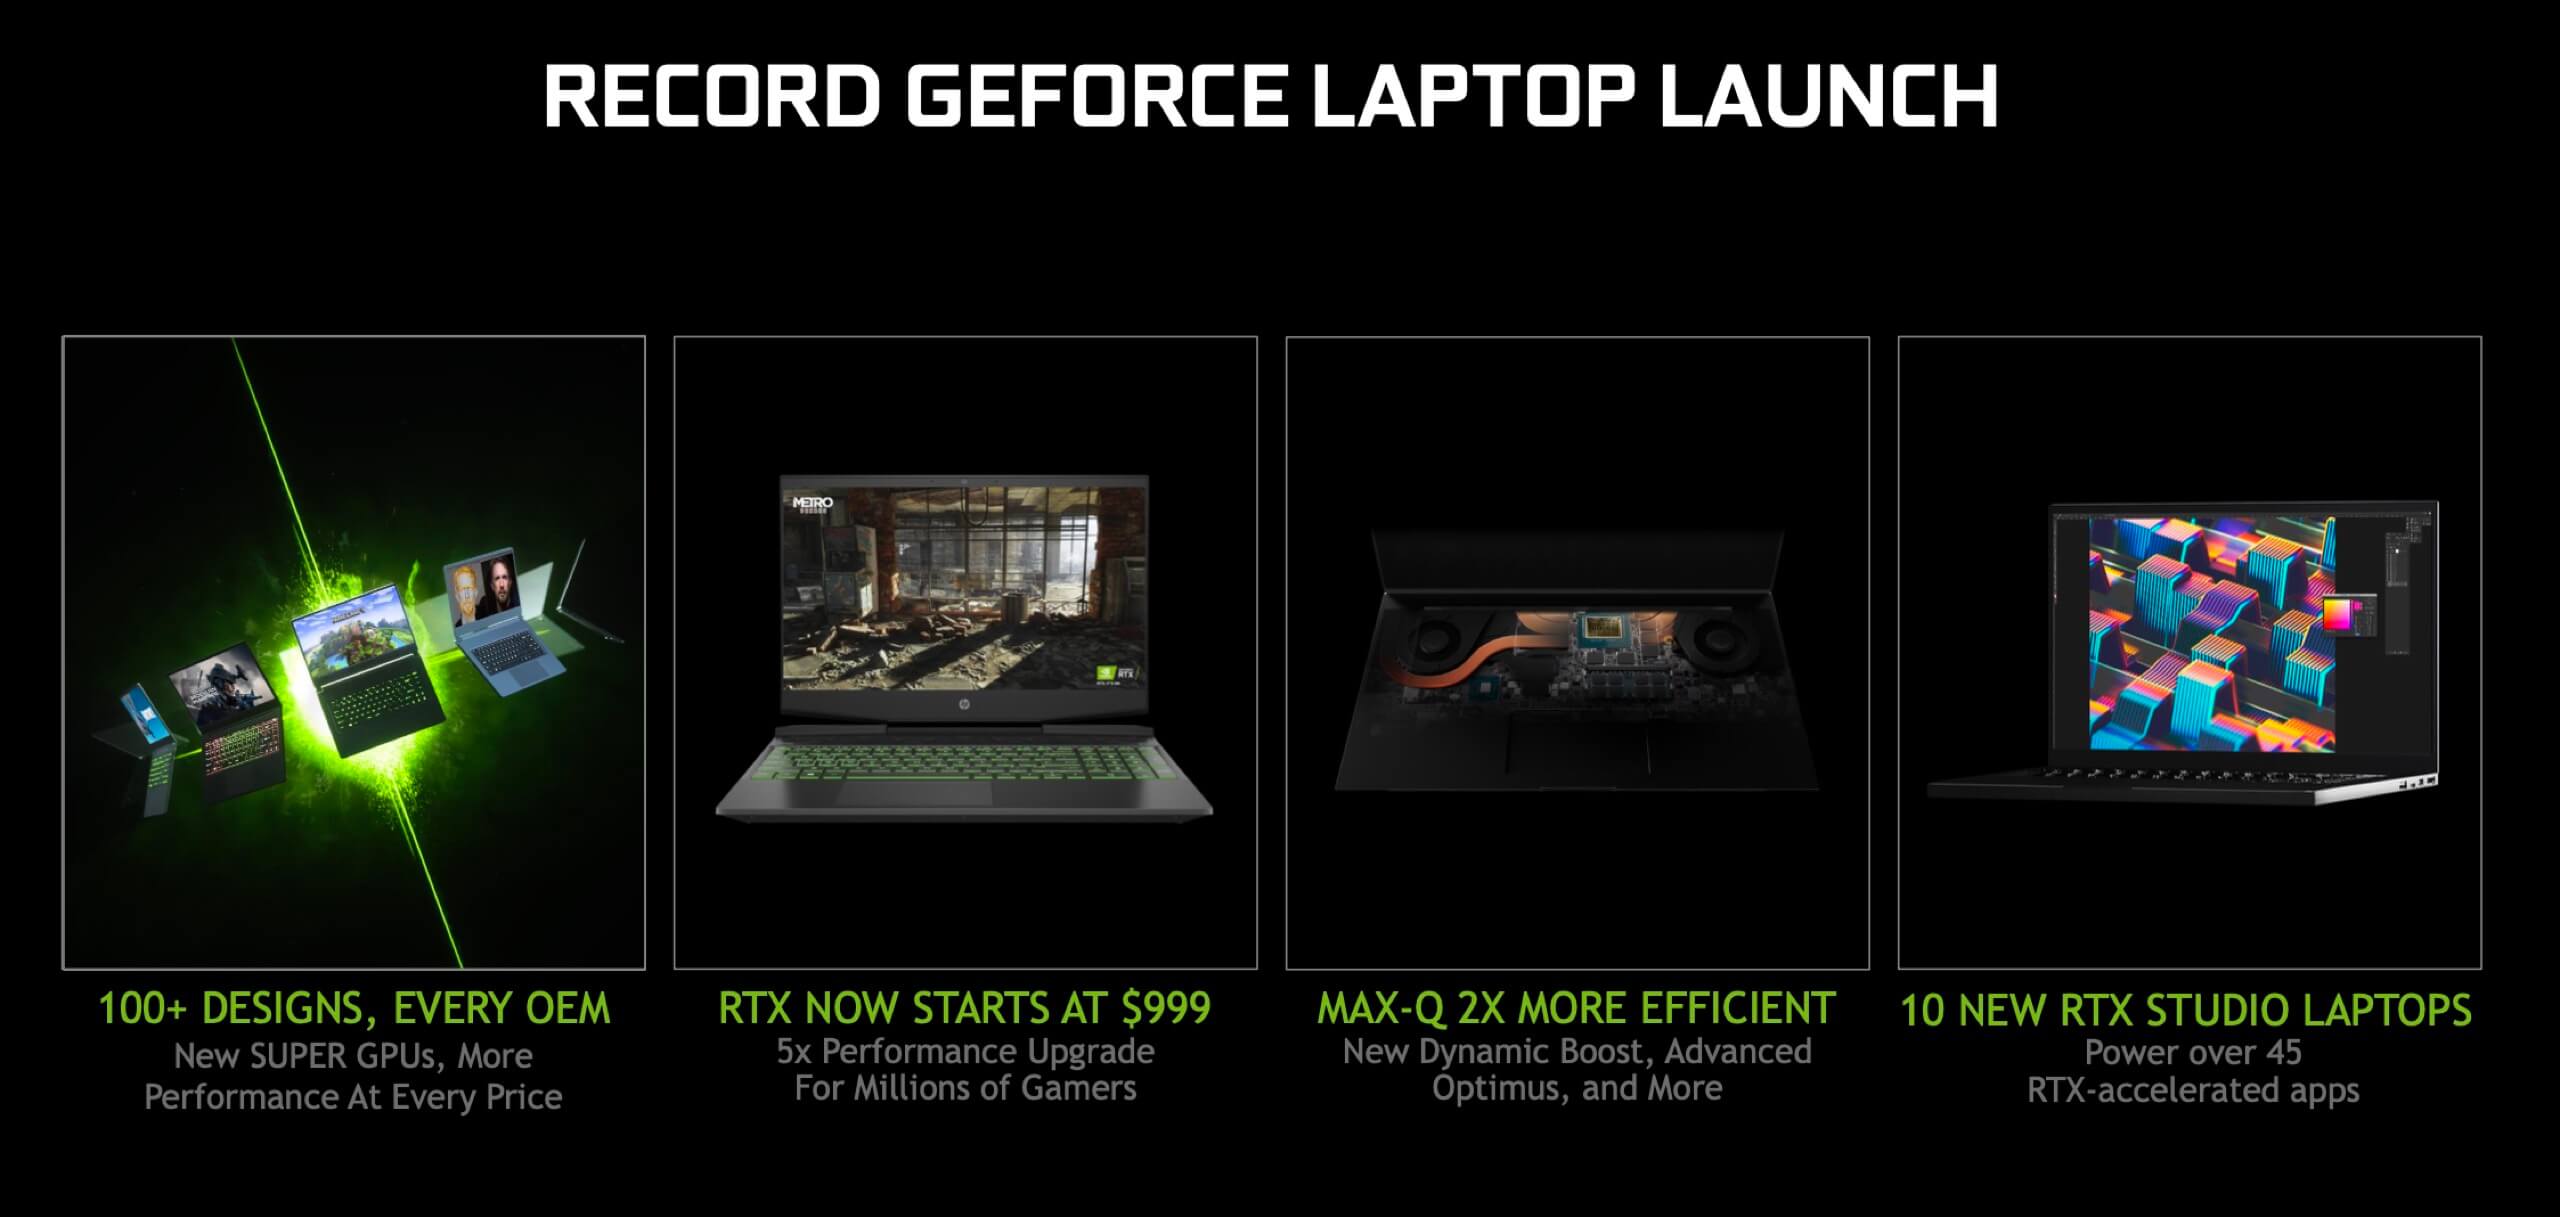 Nvidia goes Super with new GeForce RTX GPUs for gaming laptops 4